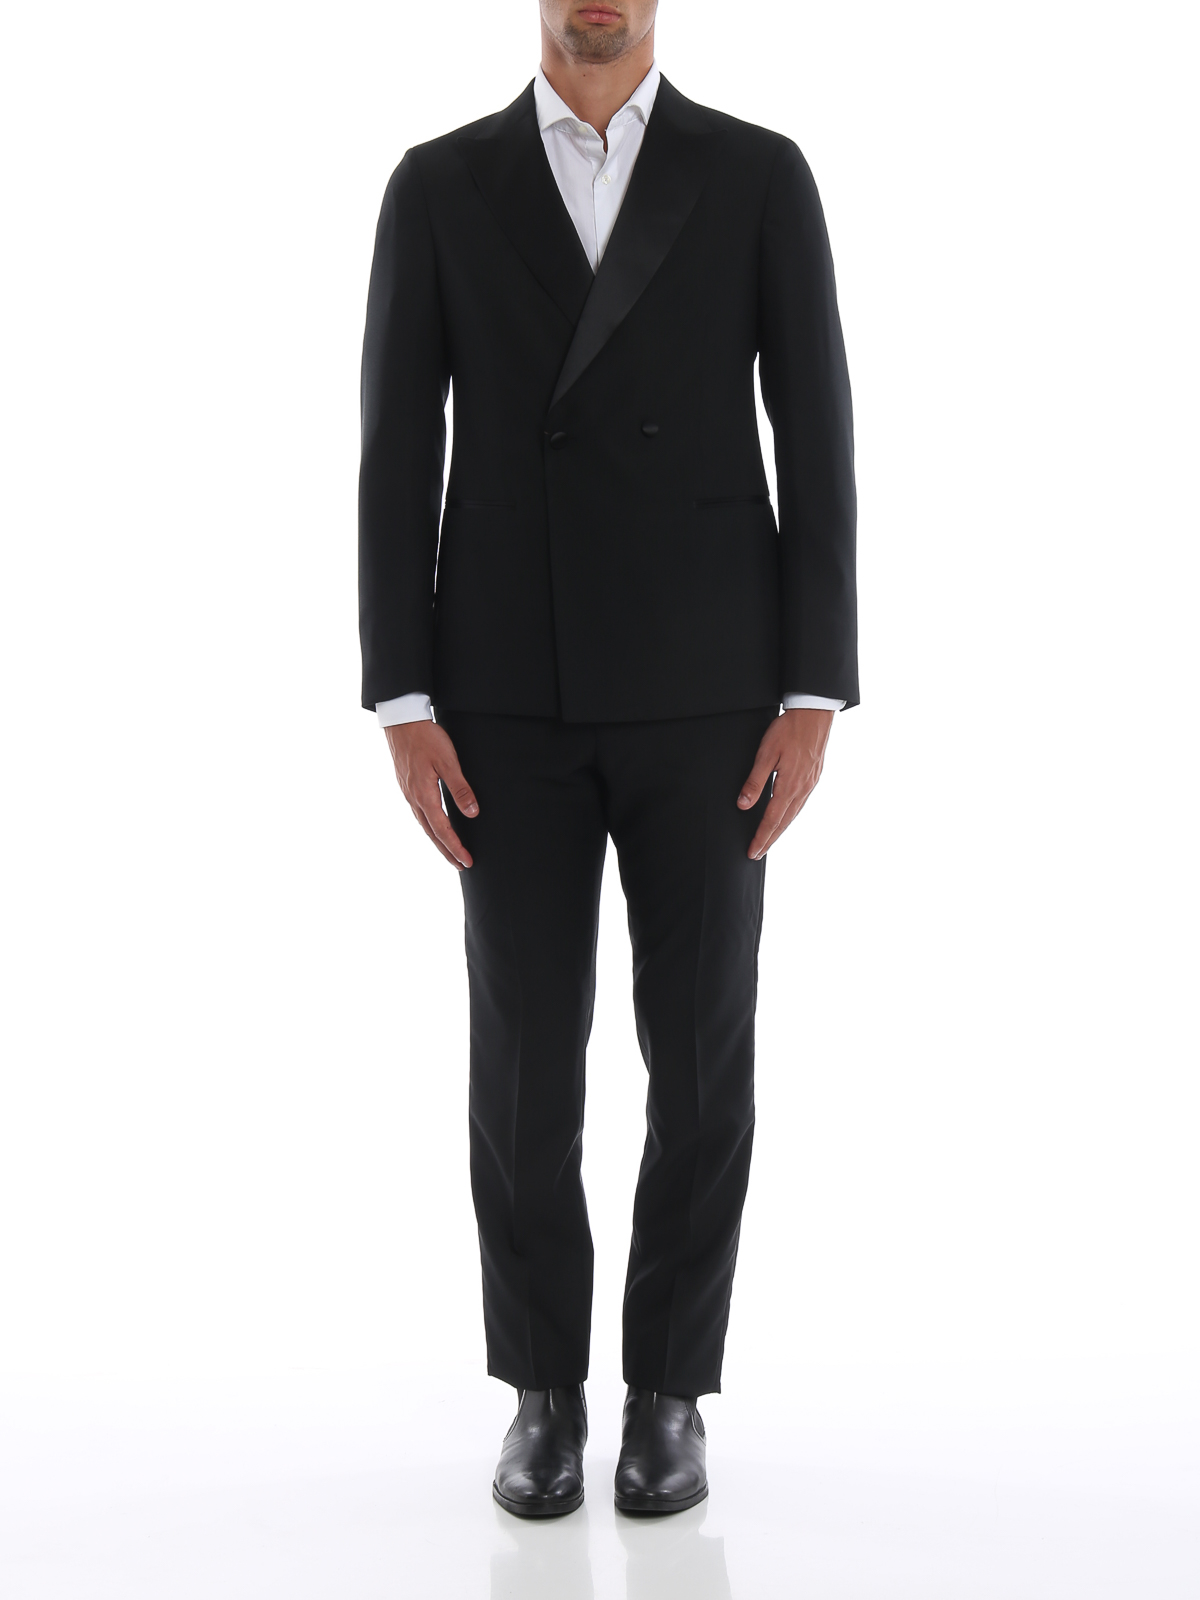 Dinner suits Z Zegna - Moscova black double-breasted smoking suit ...